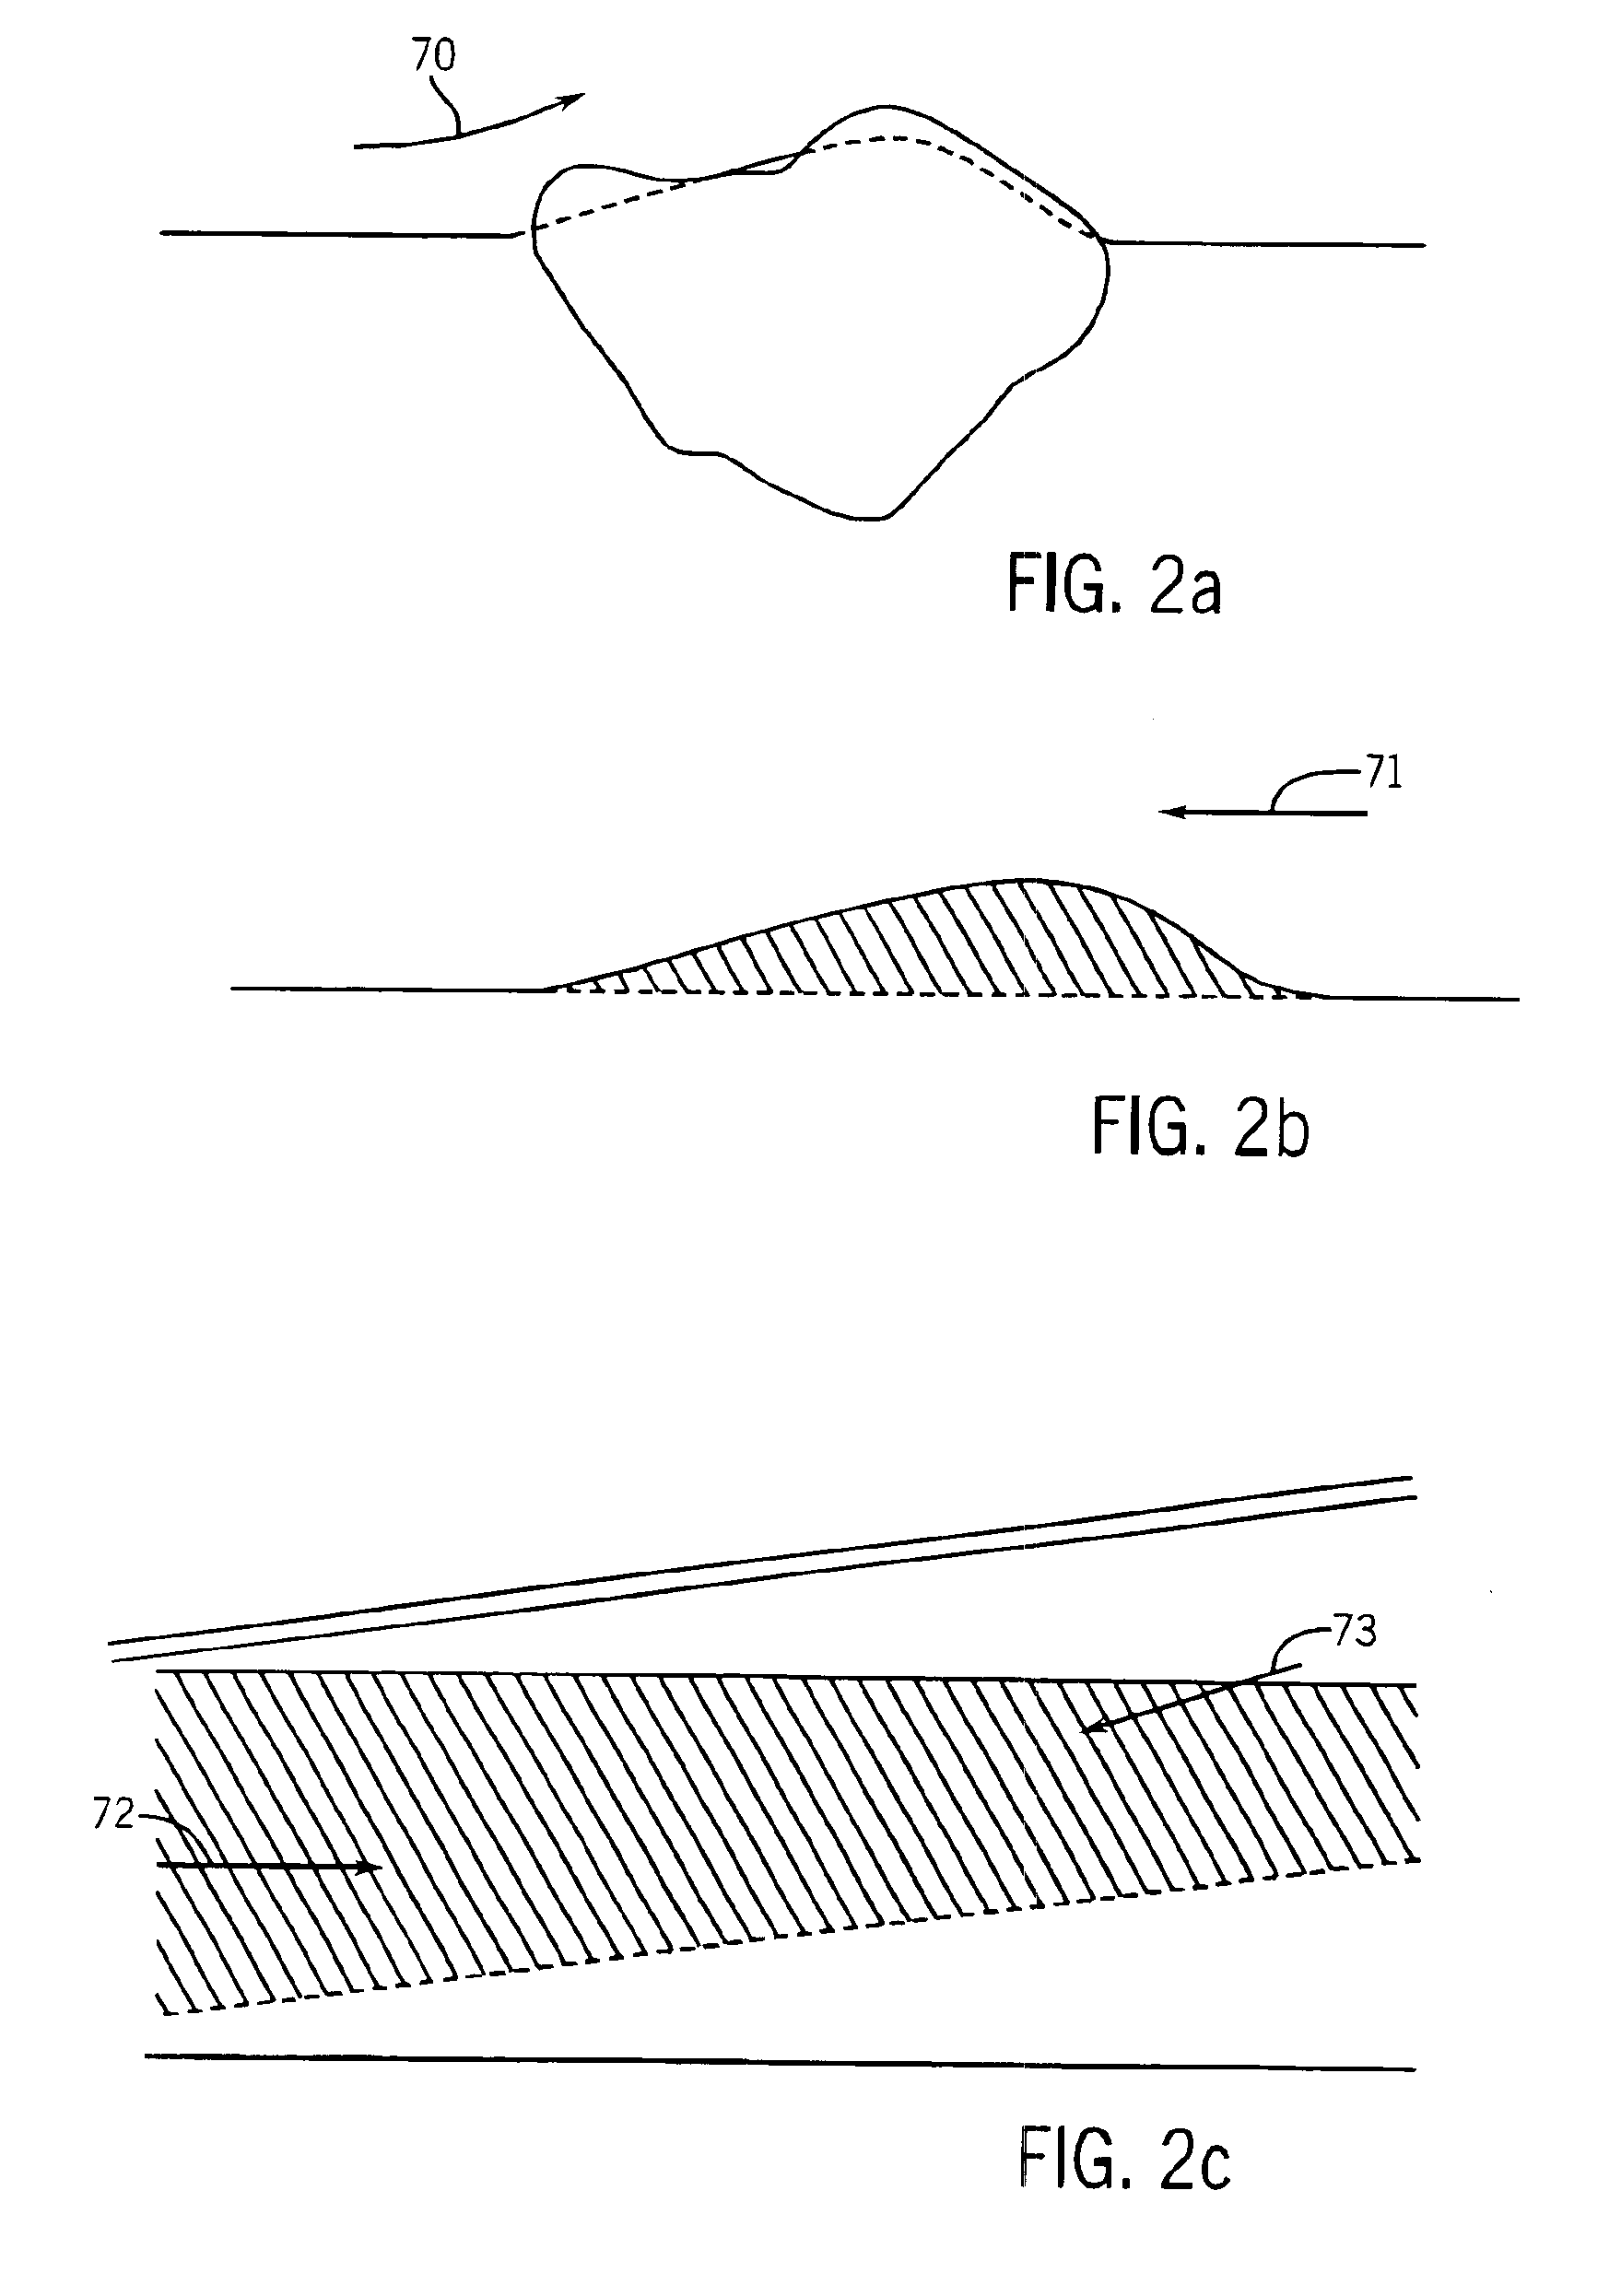 Precision farming system for applying product to a field